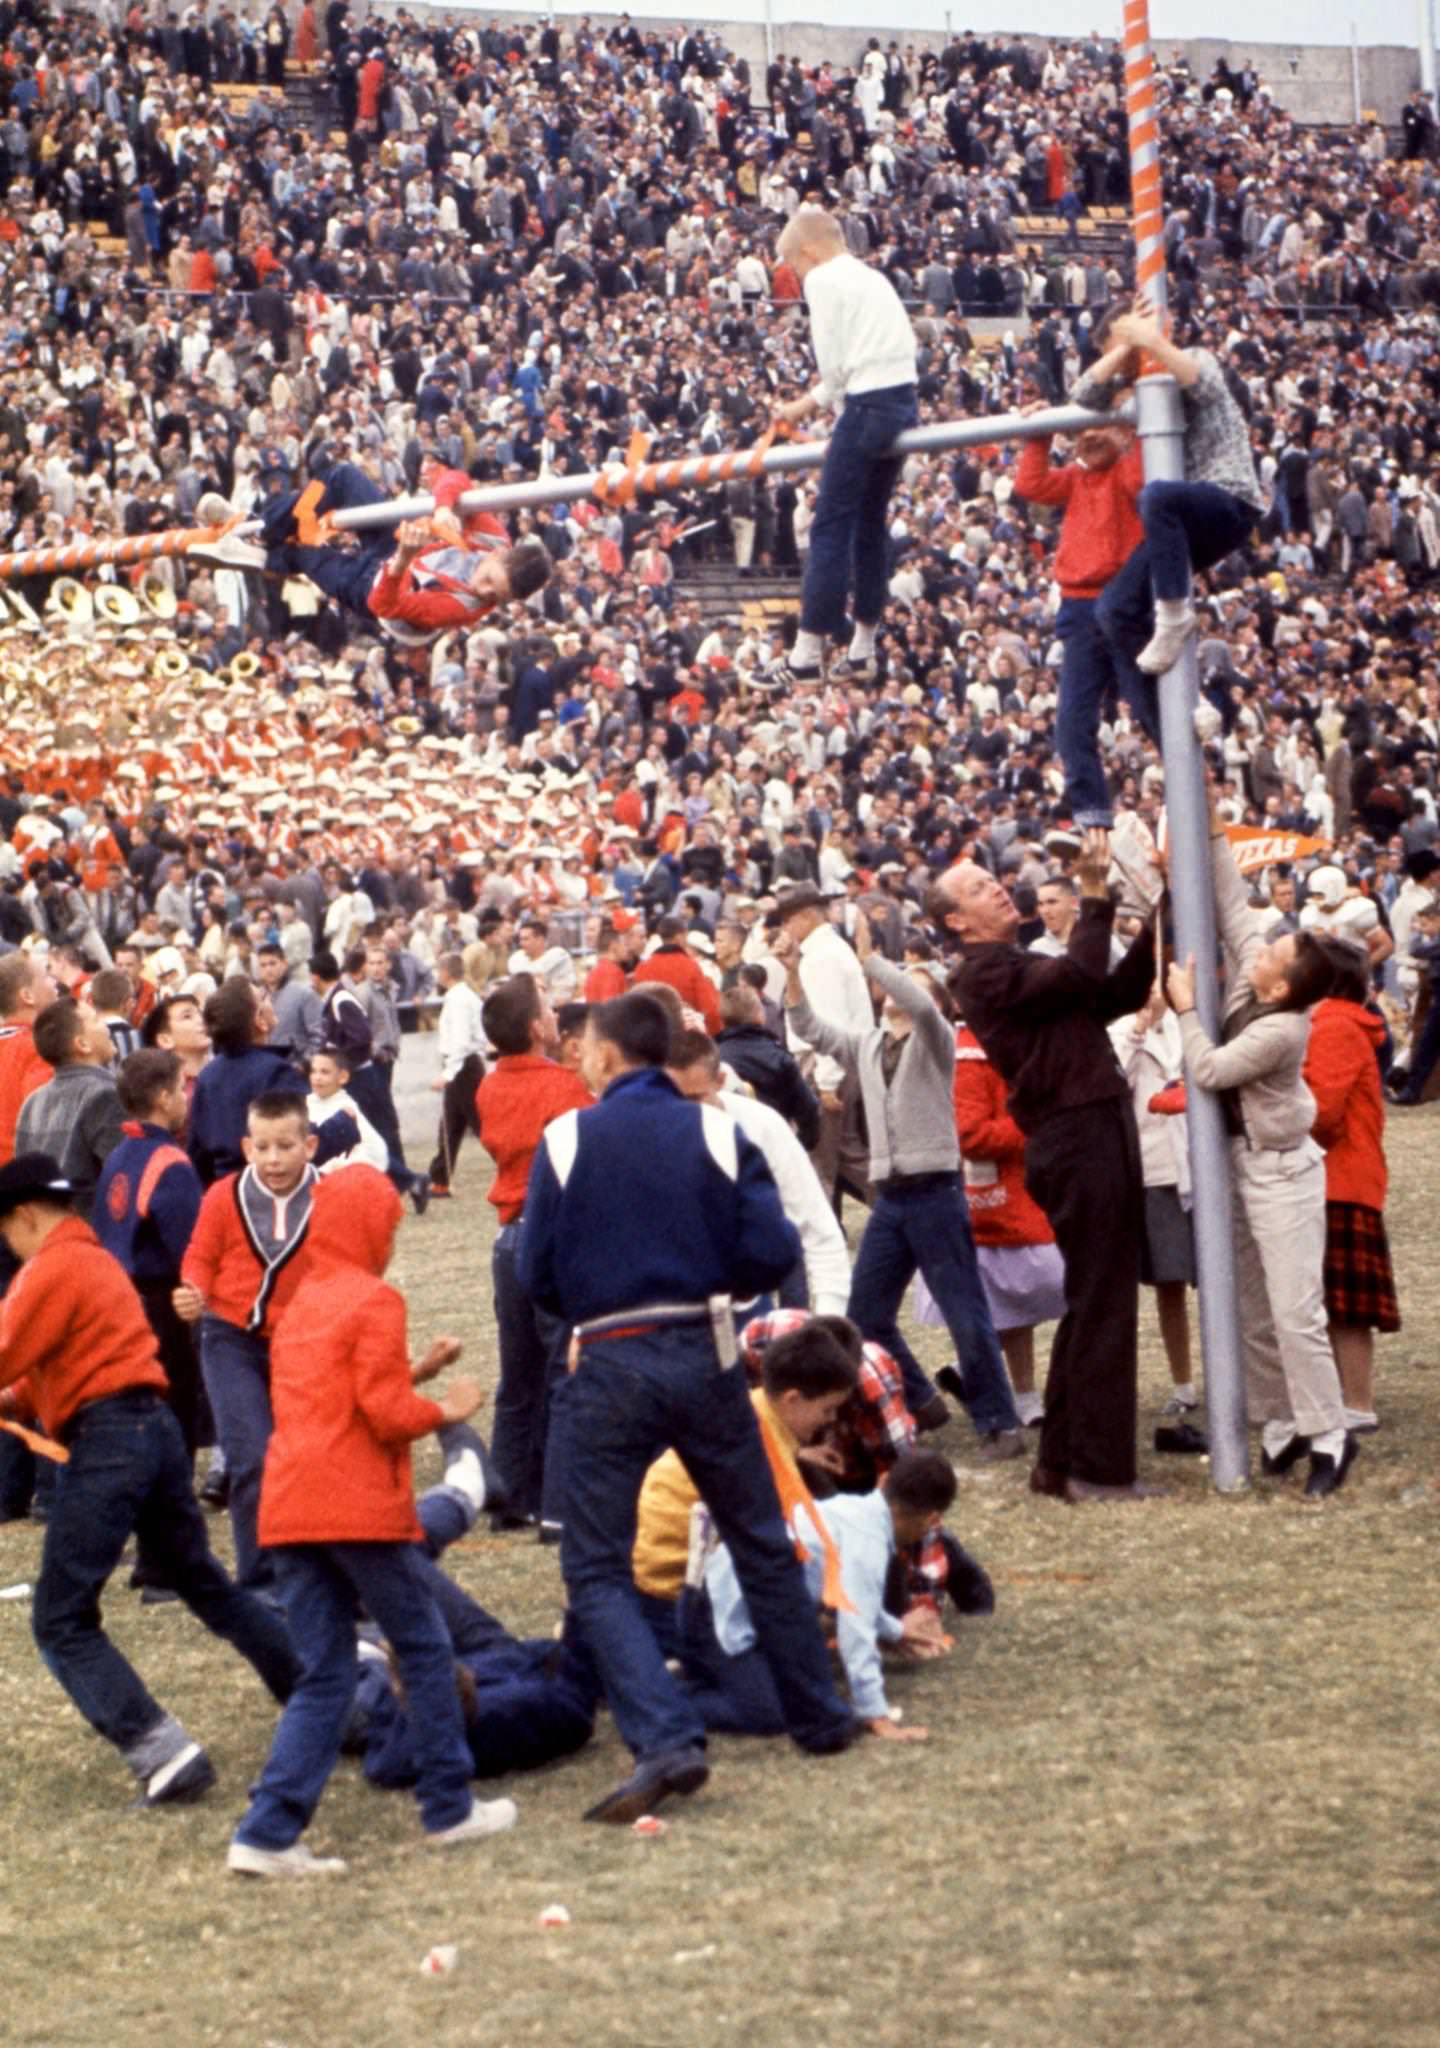 Fans of the Texas Longhorns celebrate and climb on the goal posts after the win against the Texas Christian University Horned Frogs after the rivalry game on November 12, 1960 at Amon G. Carter Stadium in Fort Worth, Texas.